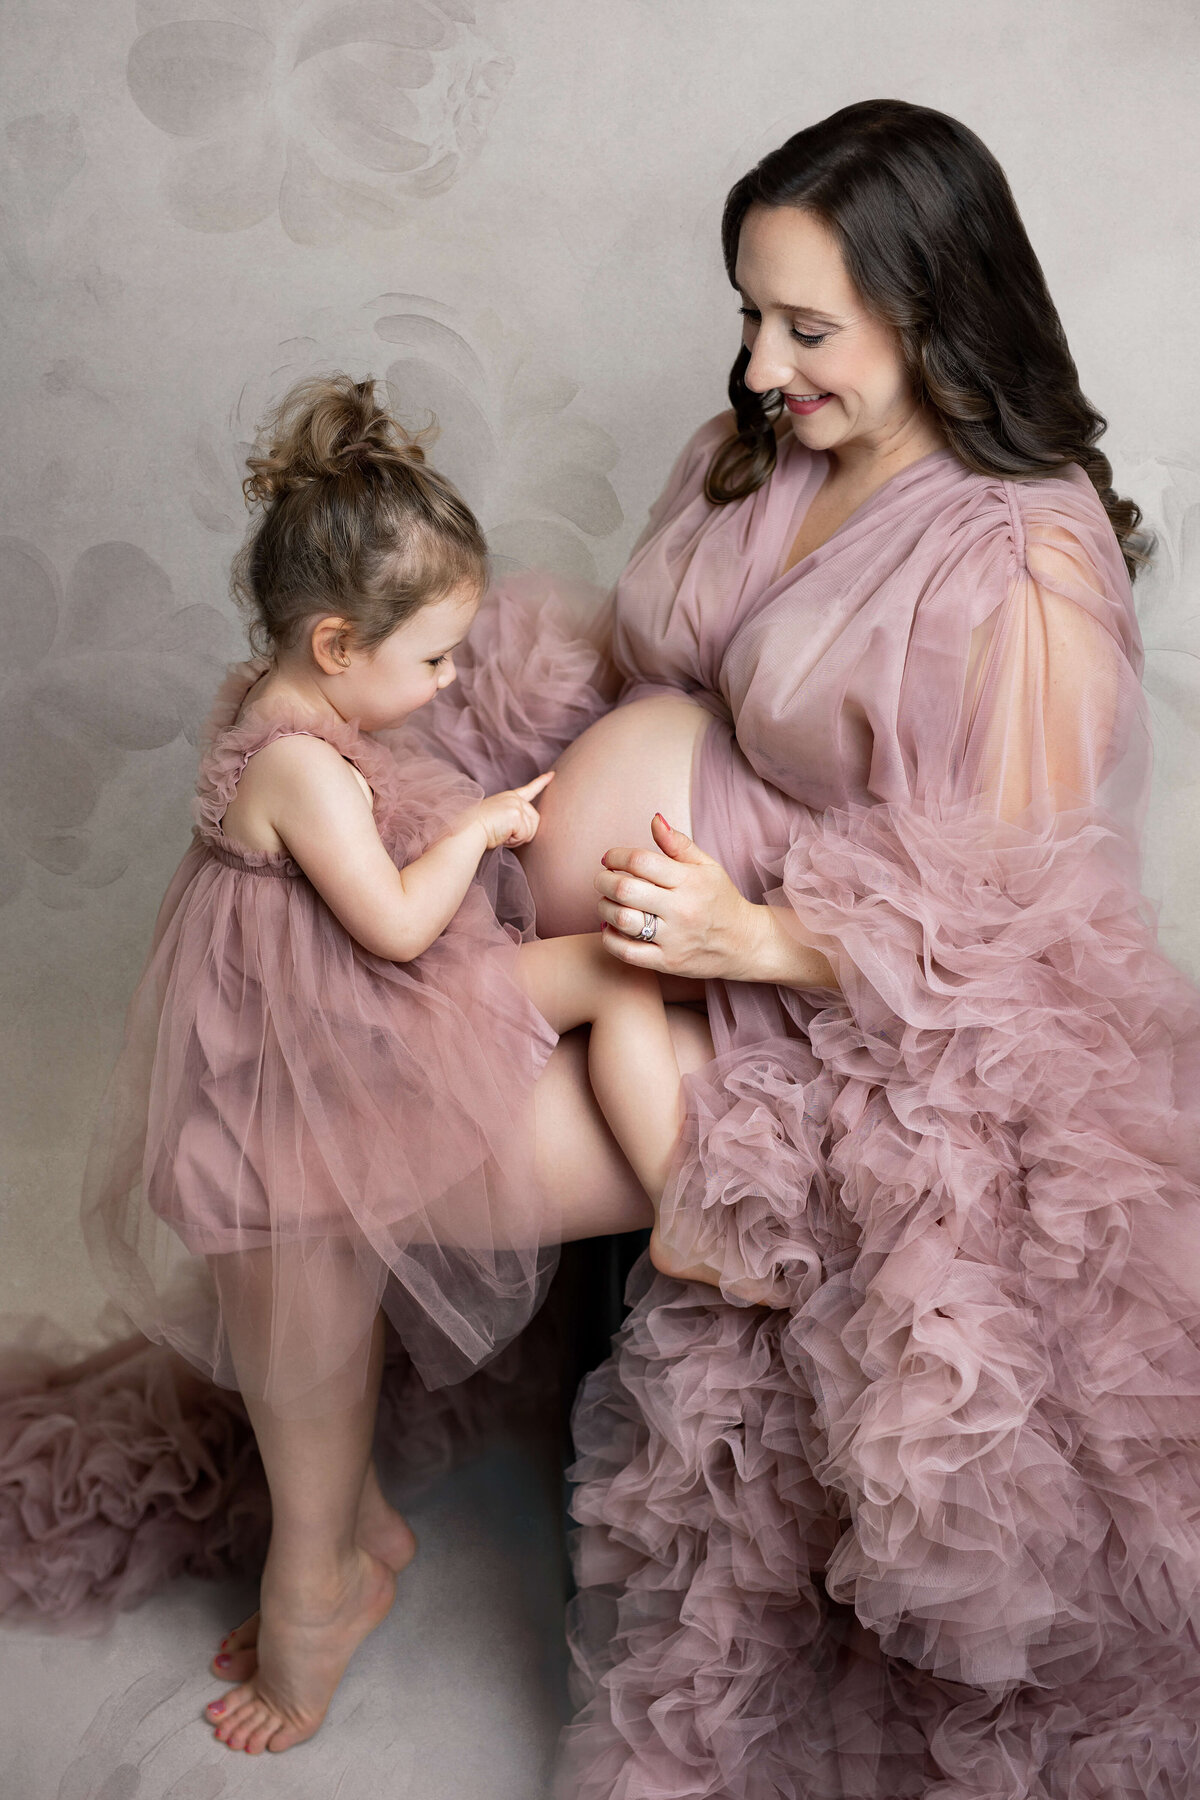 pregnant moter wearing a fluffy pink dress with her little girl sitting on her legs pointing at her pregnant belly